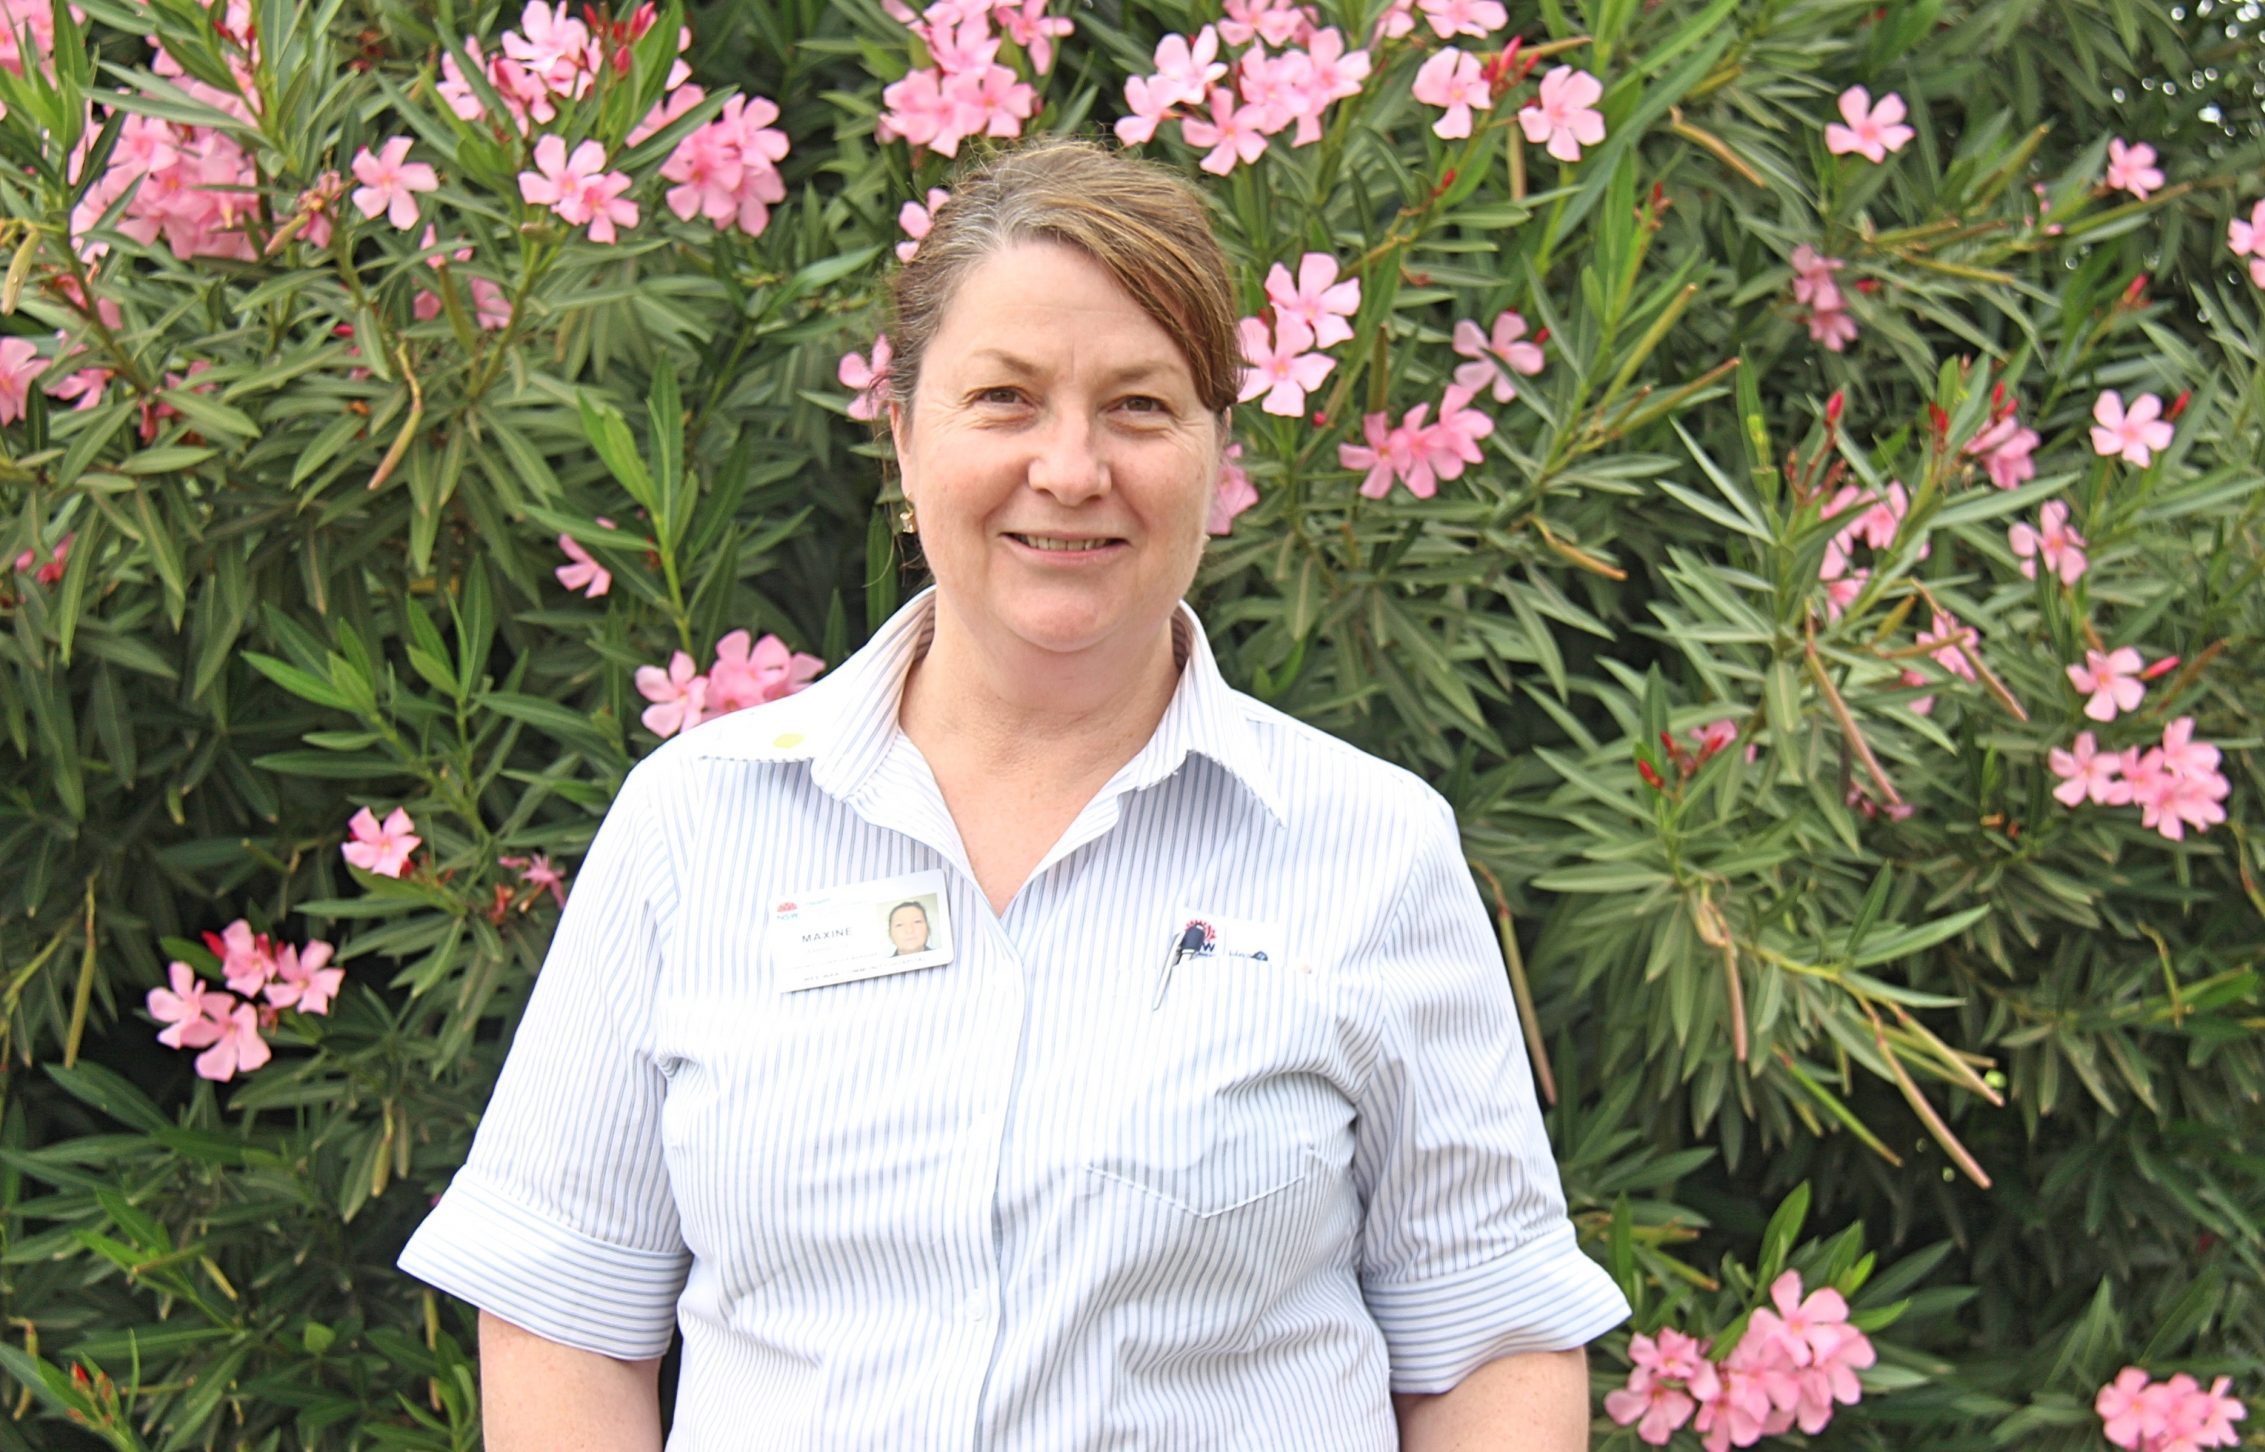 Wee Waa welcomes new health service manager